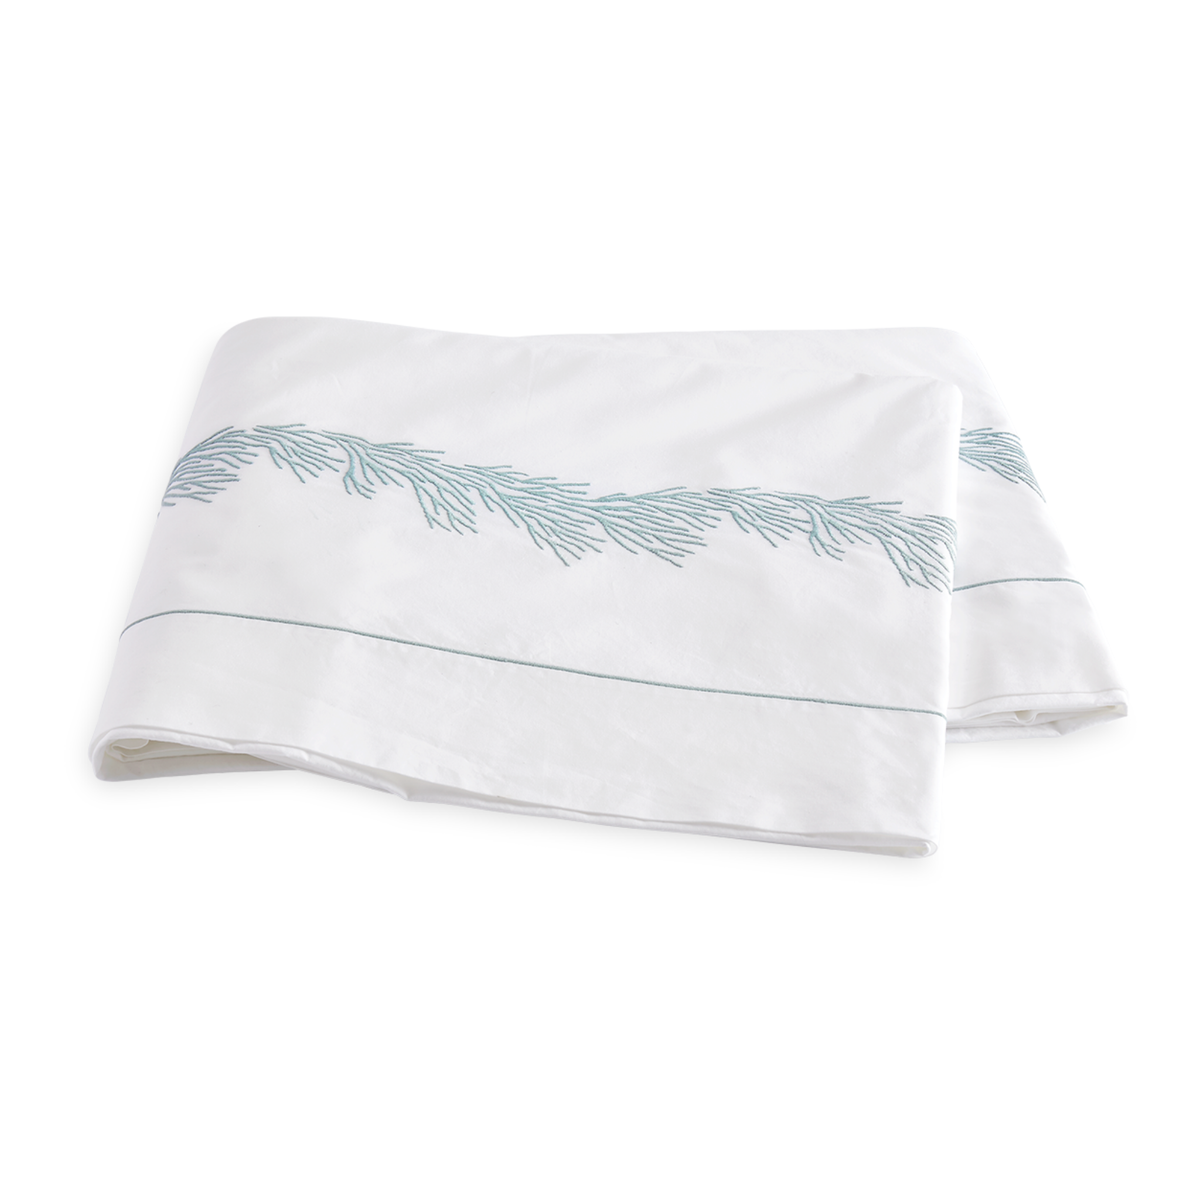 Folded Flat Sheet of Matouk Atoll Bedding Collection Aegean Color